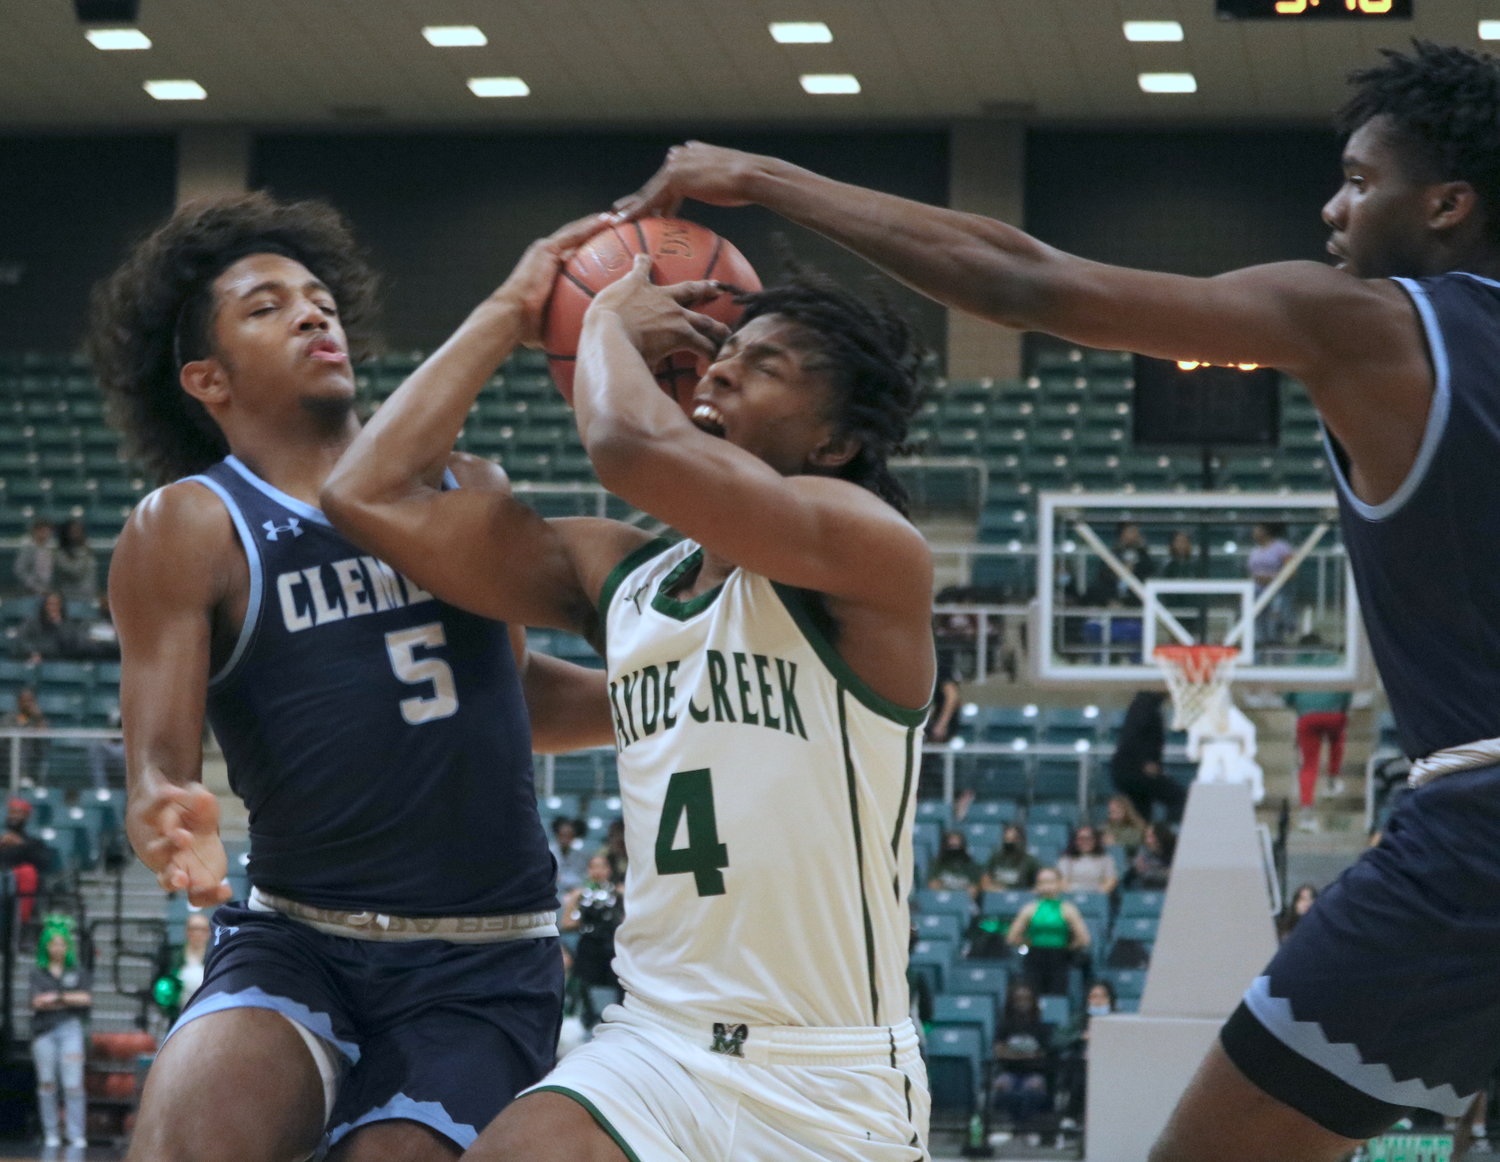 A defender tries to strip the ball from Angel Sonnier during Tuesday’s Class 6A regional quarterfinal between Mayde Creek and Fort Bend Clements at the Merrell Center.